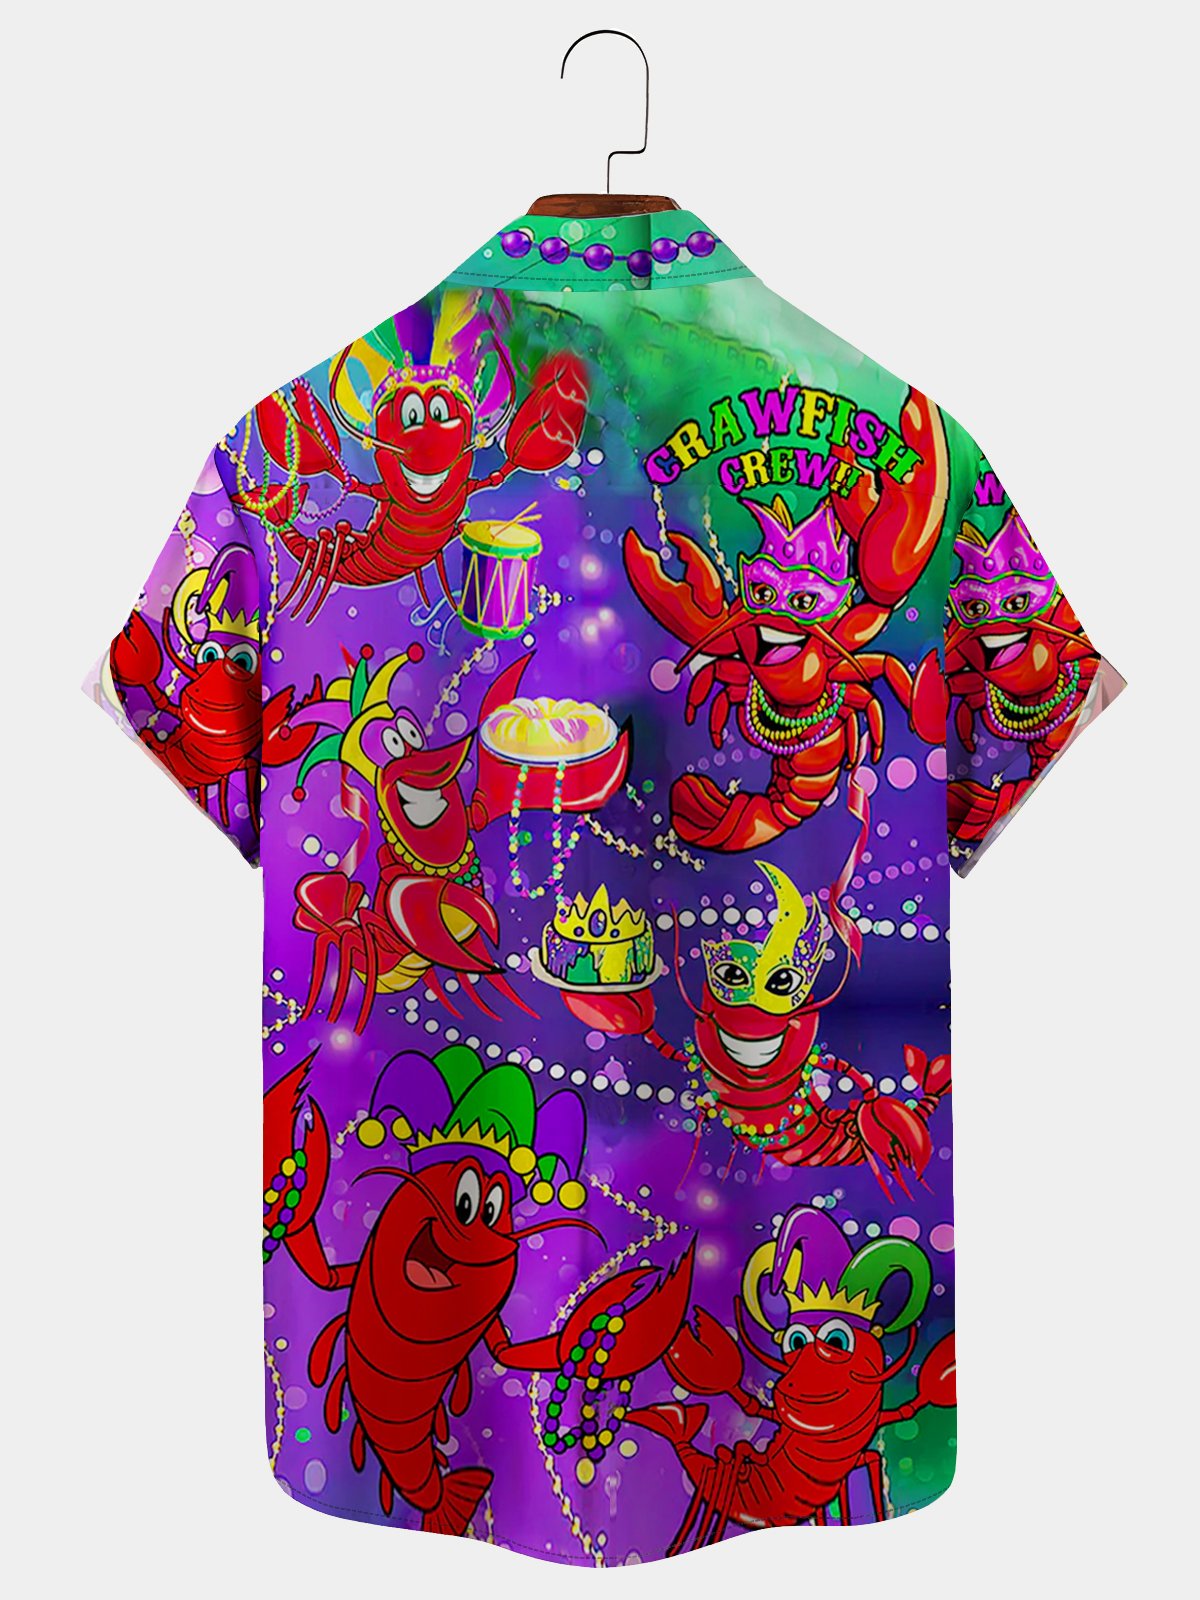 Royaura Carnival Food Festival New Orleans Lobster Print Shirt Plus Size Holiday Shirt